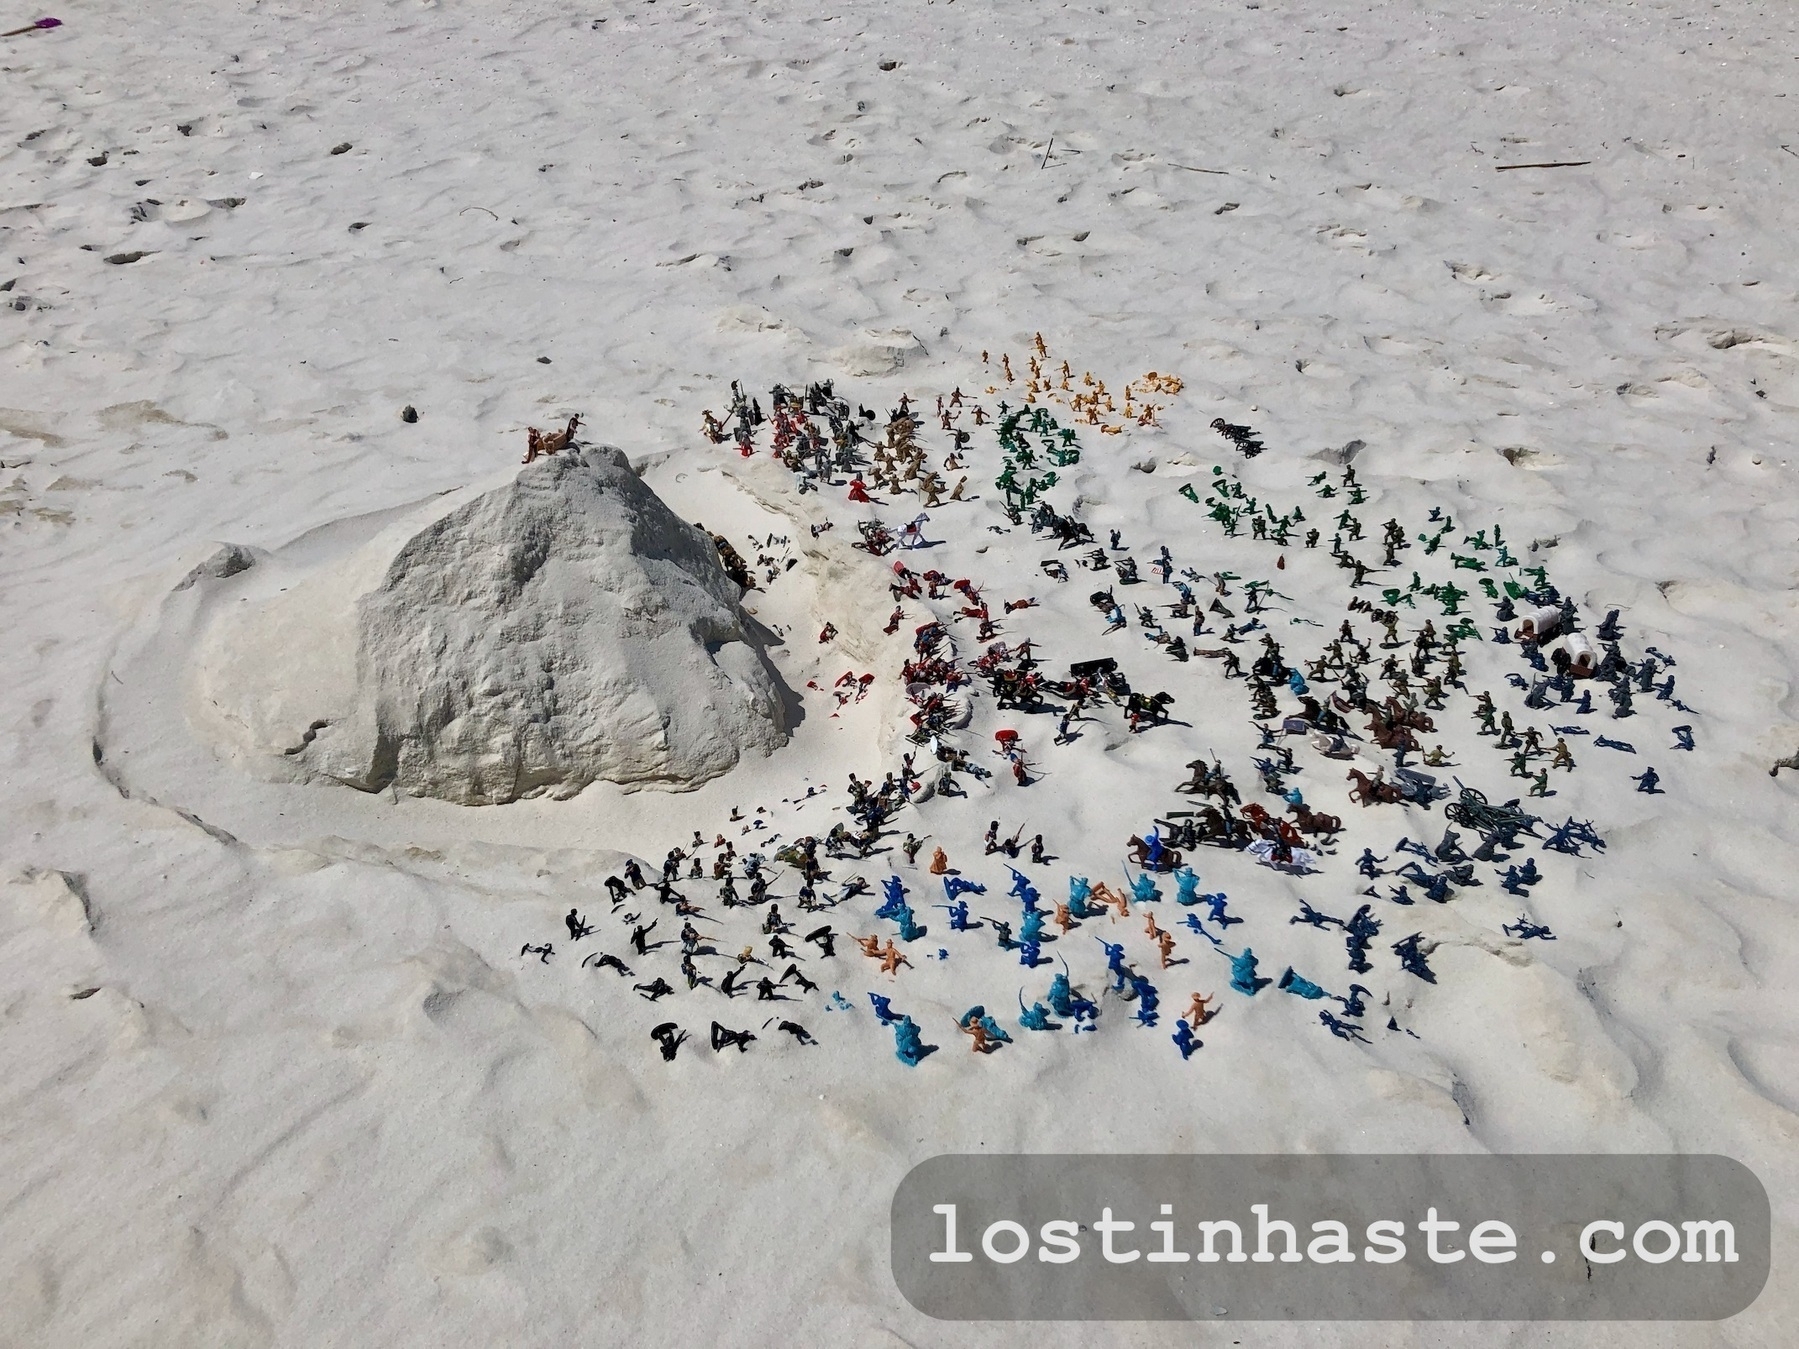 A large group of miniature figures is positioned around a grayish outcrop on a sand-covered ground, website address 'lostinhaste.com' displayed.